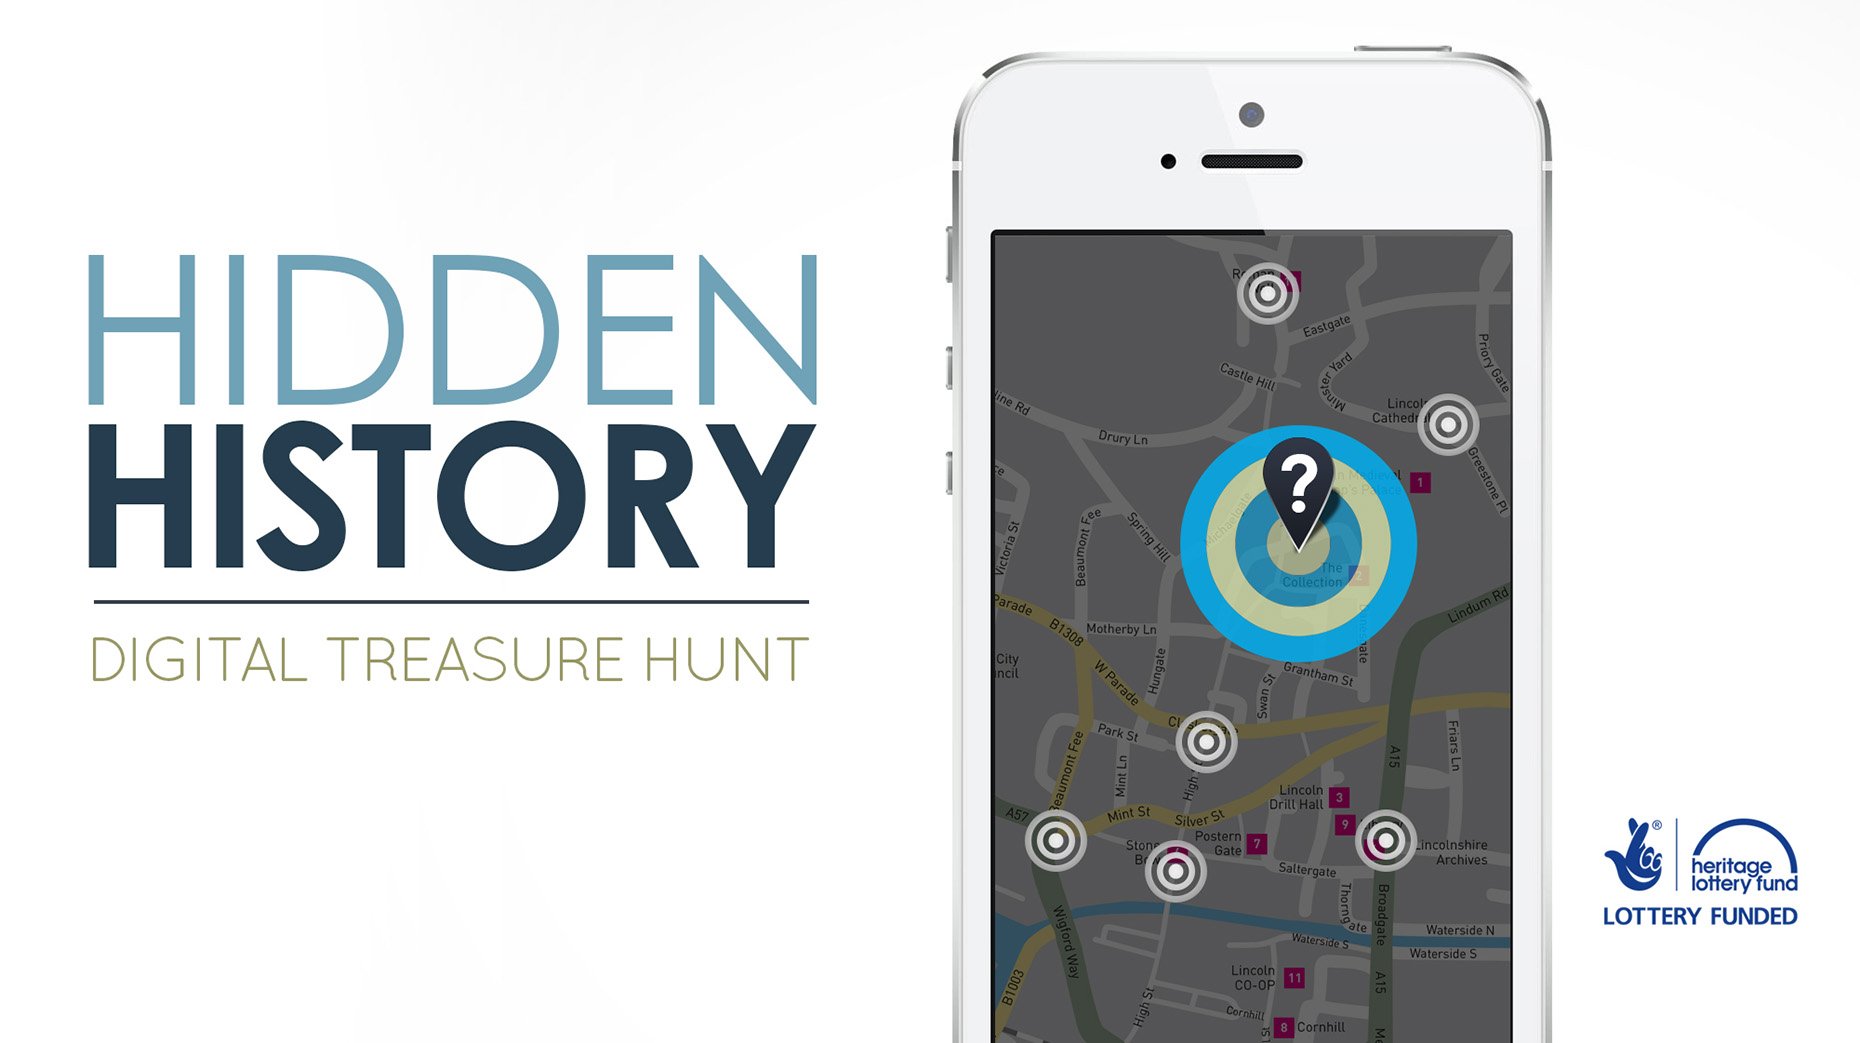 The new Hidden History app will be designed by Lincoln based design agency Blueprint. Local volunteers help to create documentaries.